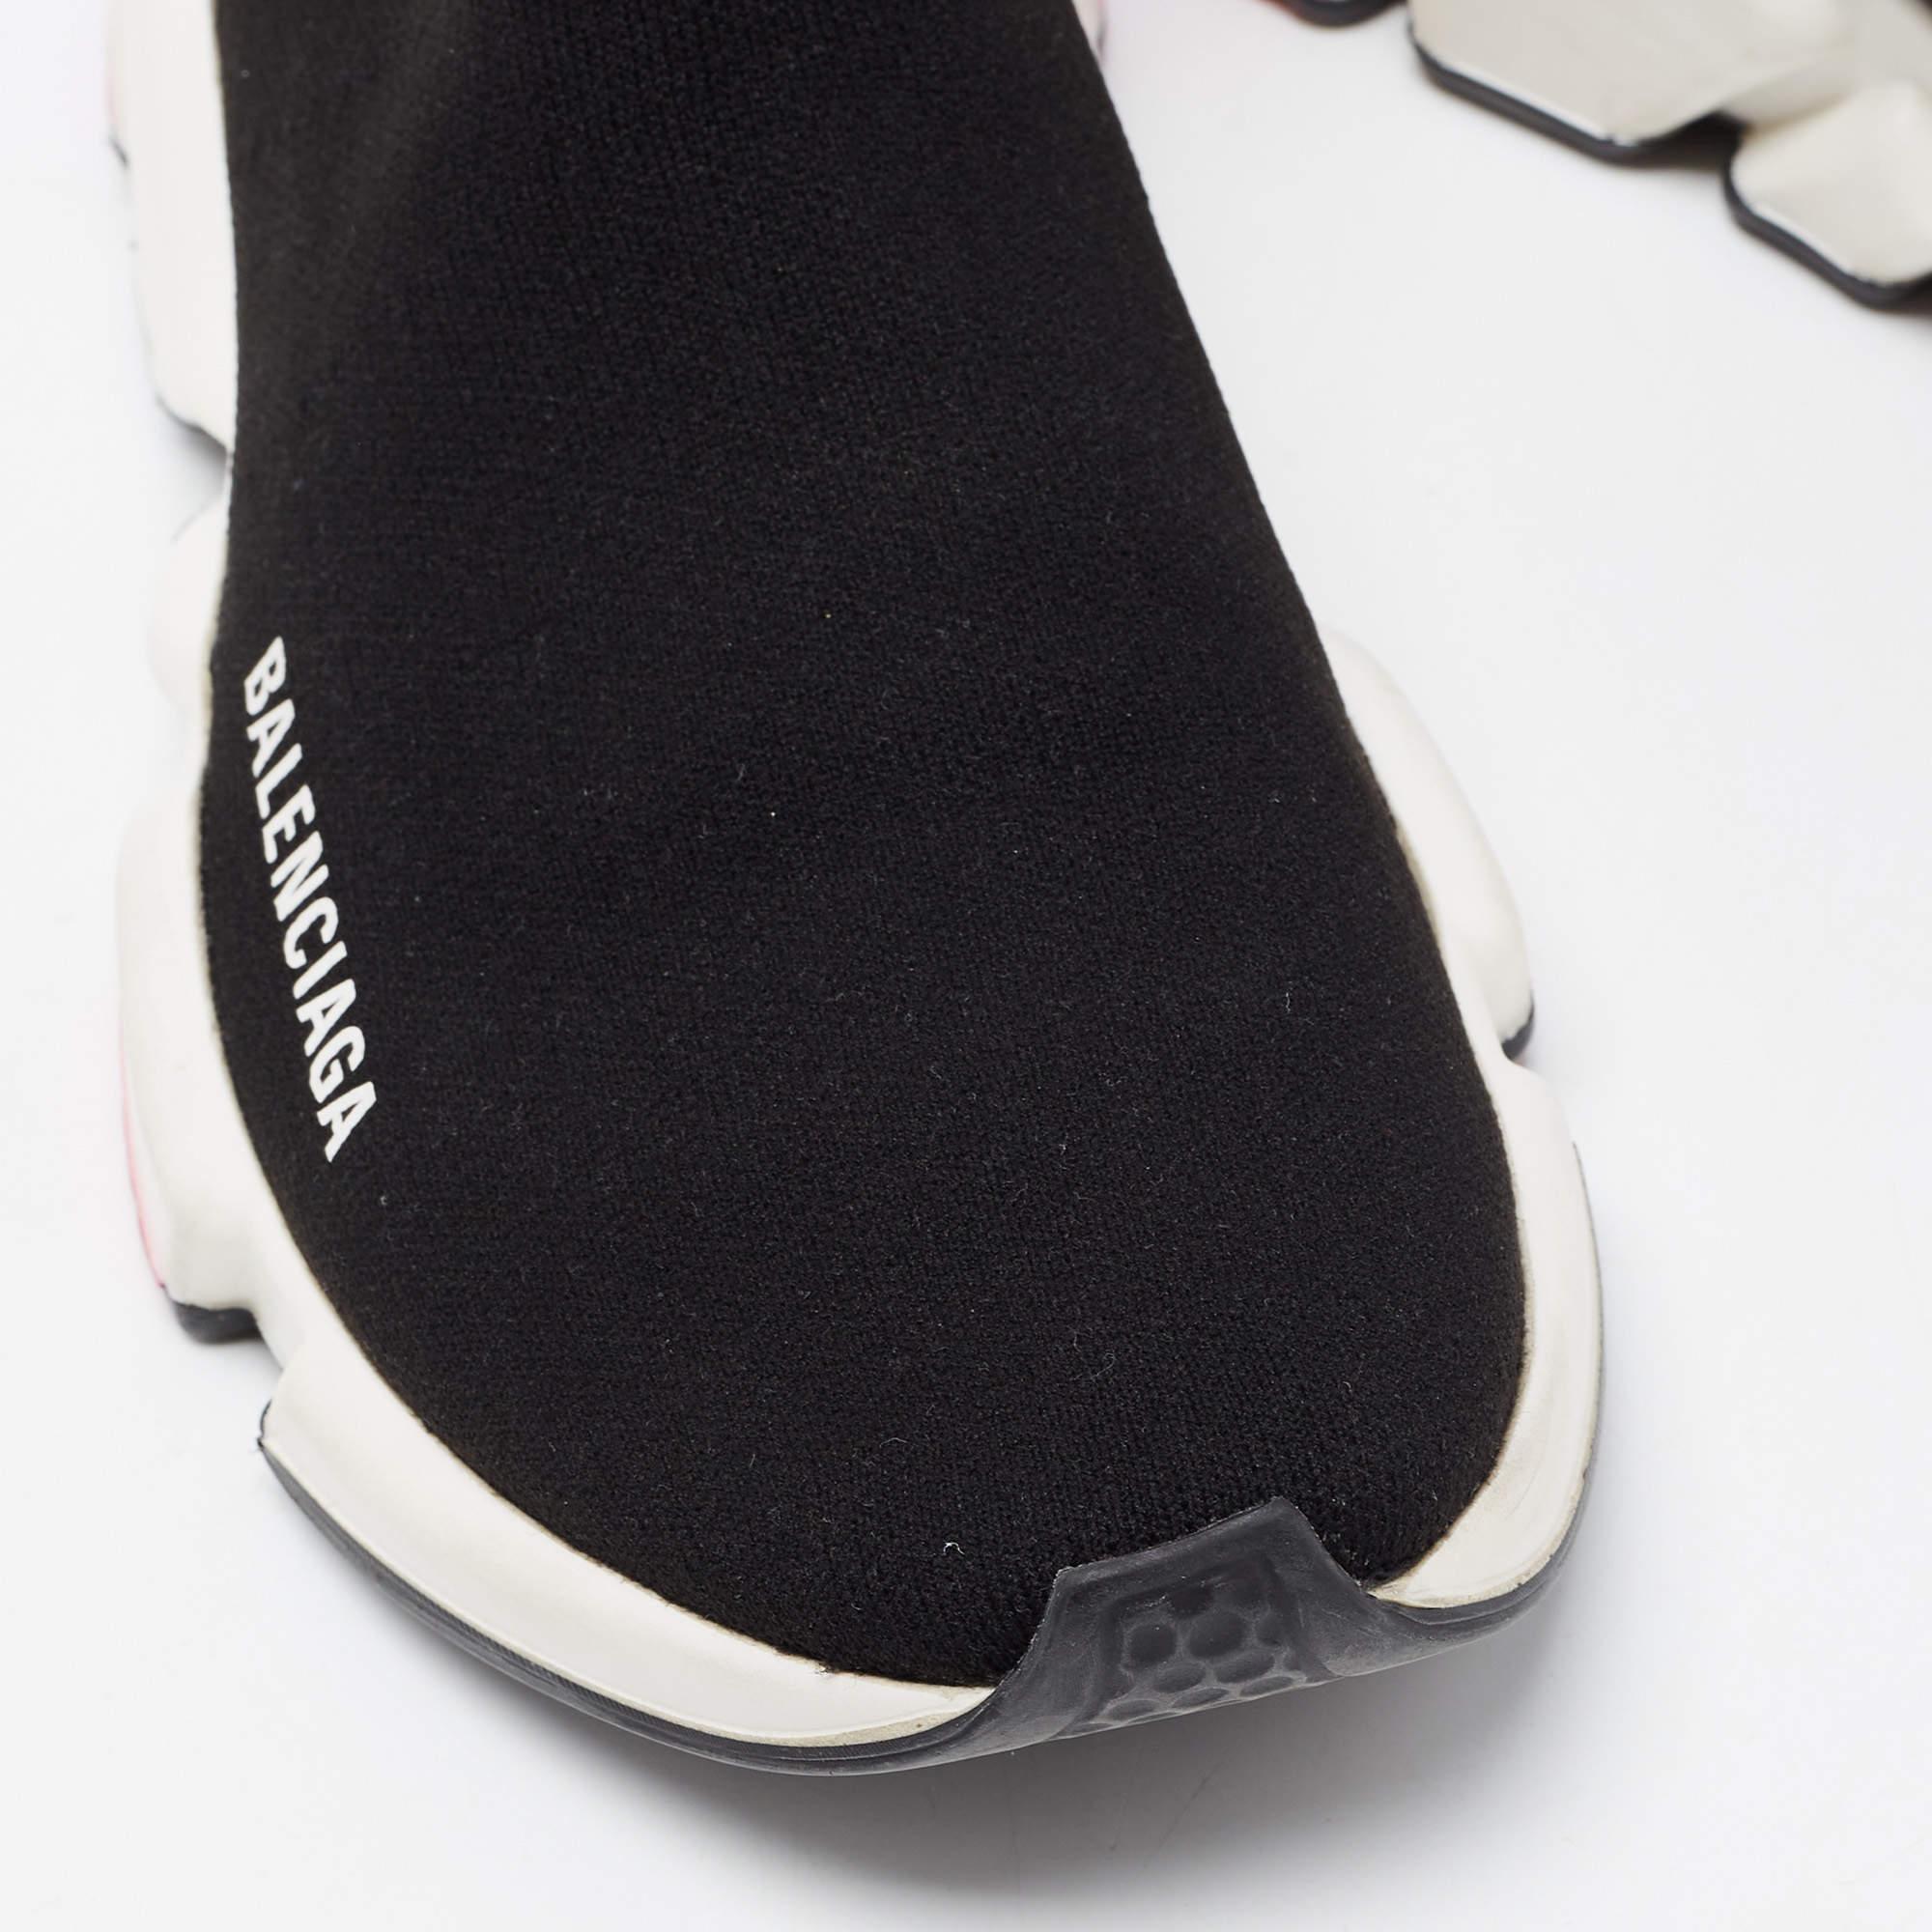 Balenciaga Black Knit Fabric Speed Trainer Sneakers Size 38 1